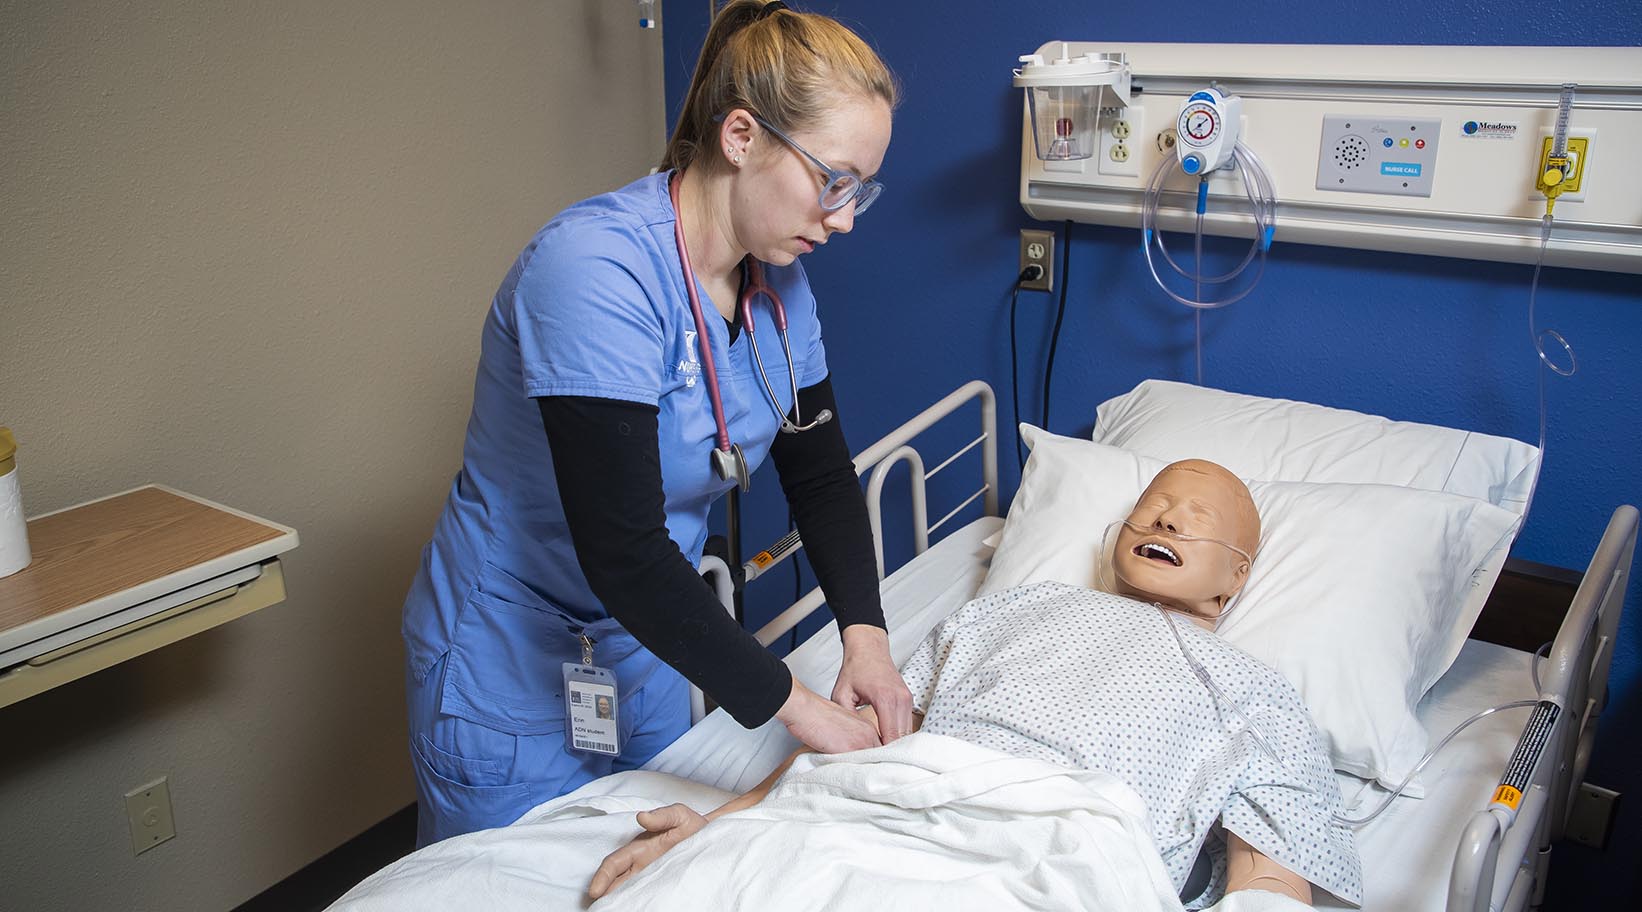 A student nurse working on a simulated patient